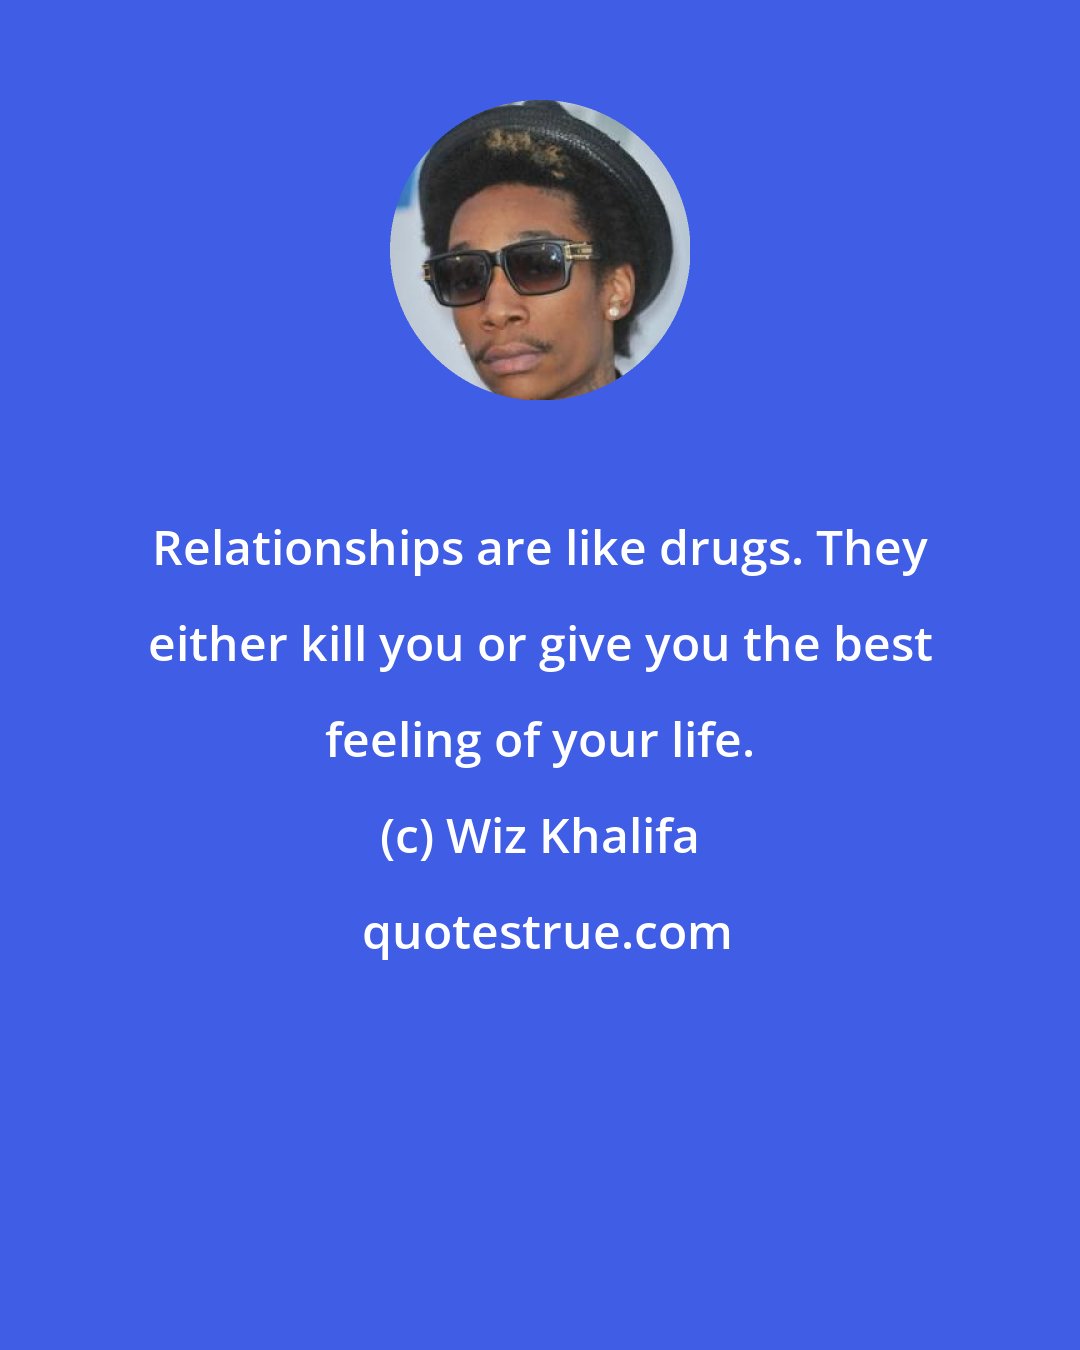 Wiz Khalifa: Relationships are like drugs. They either kill you or give you the best feeling of your life.